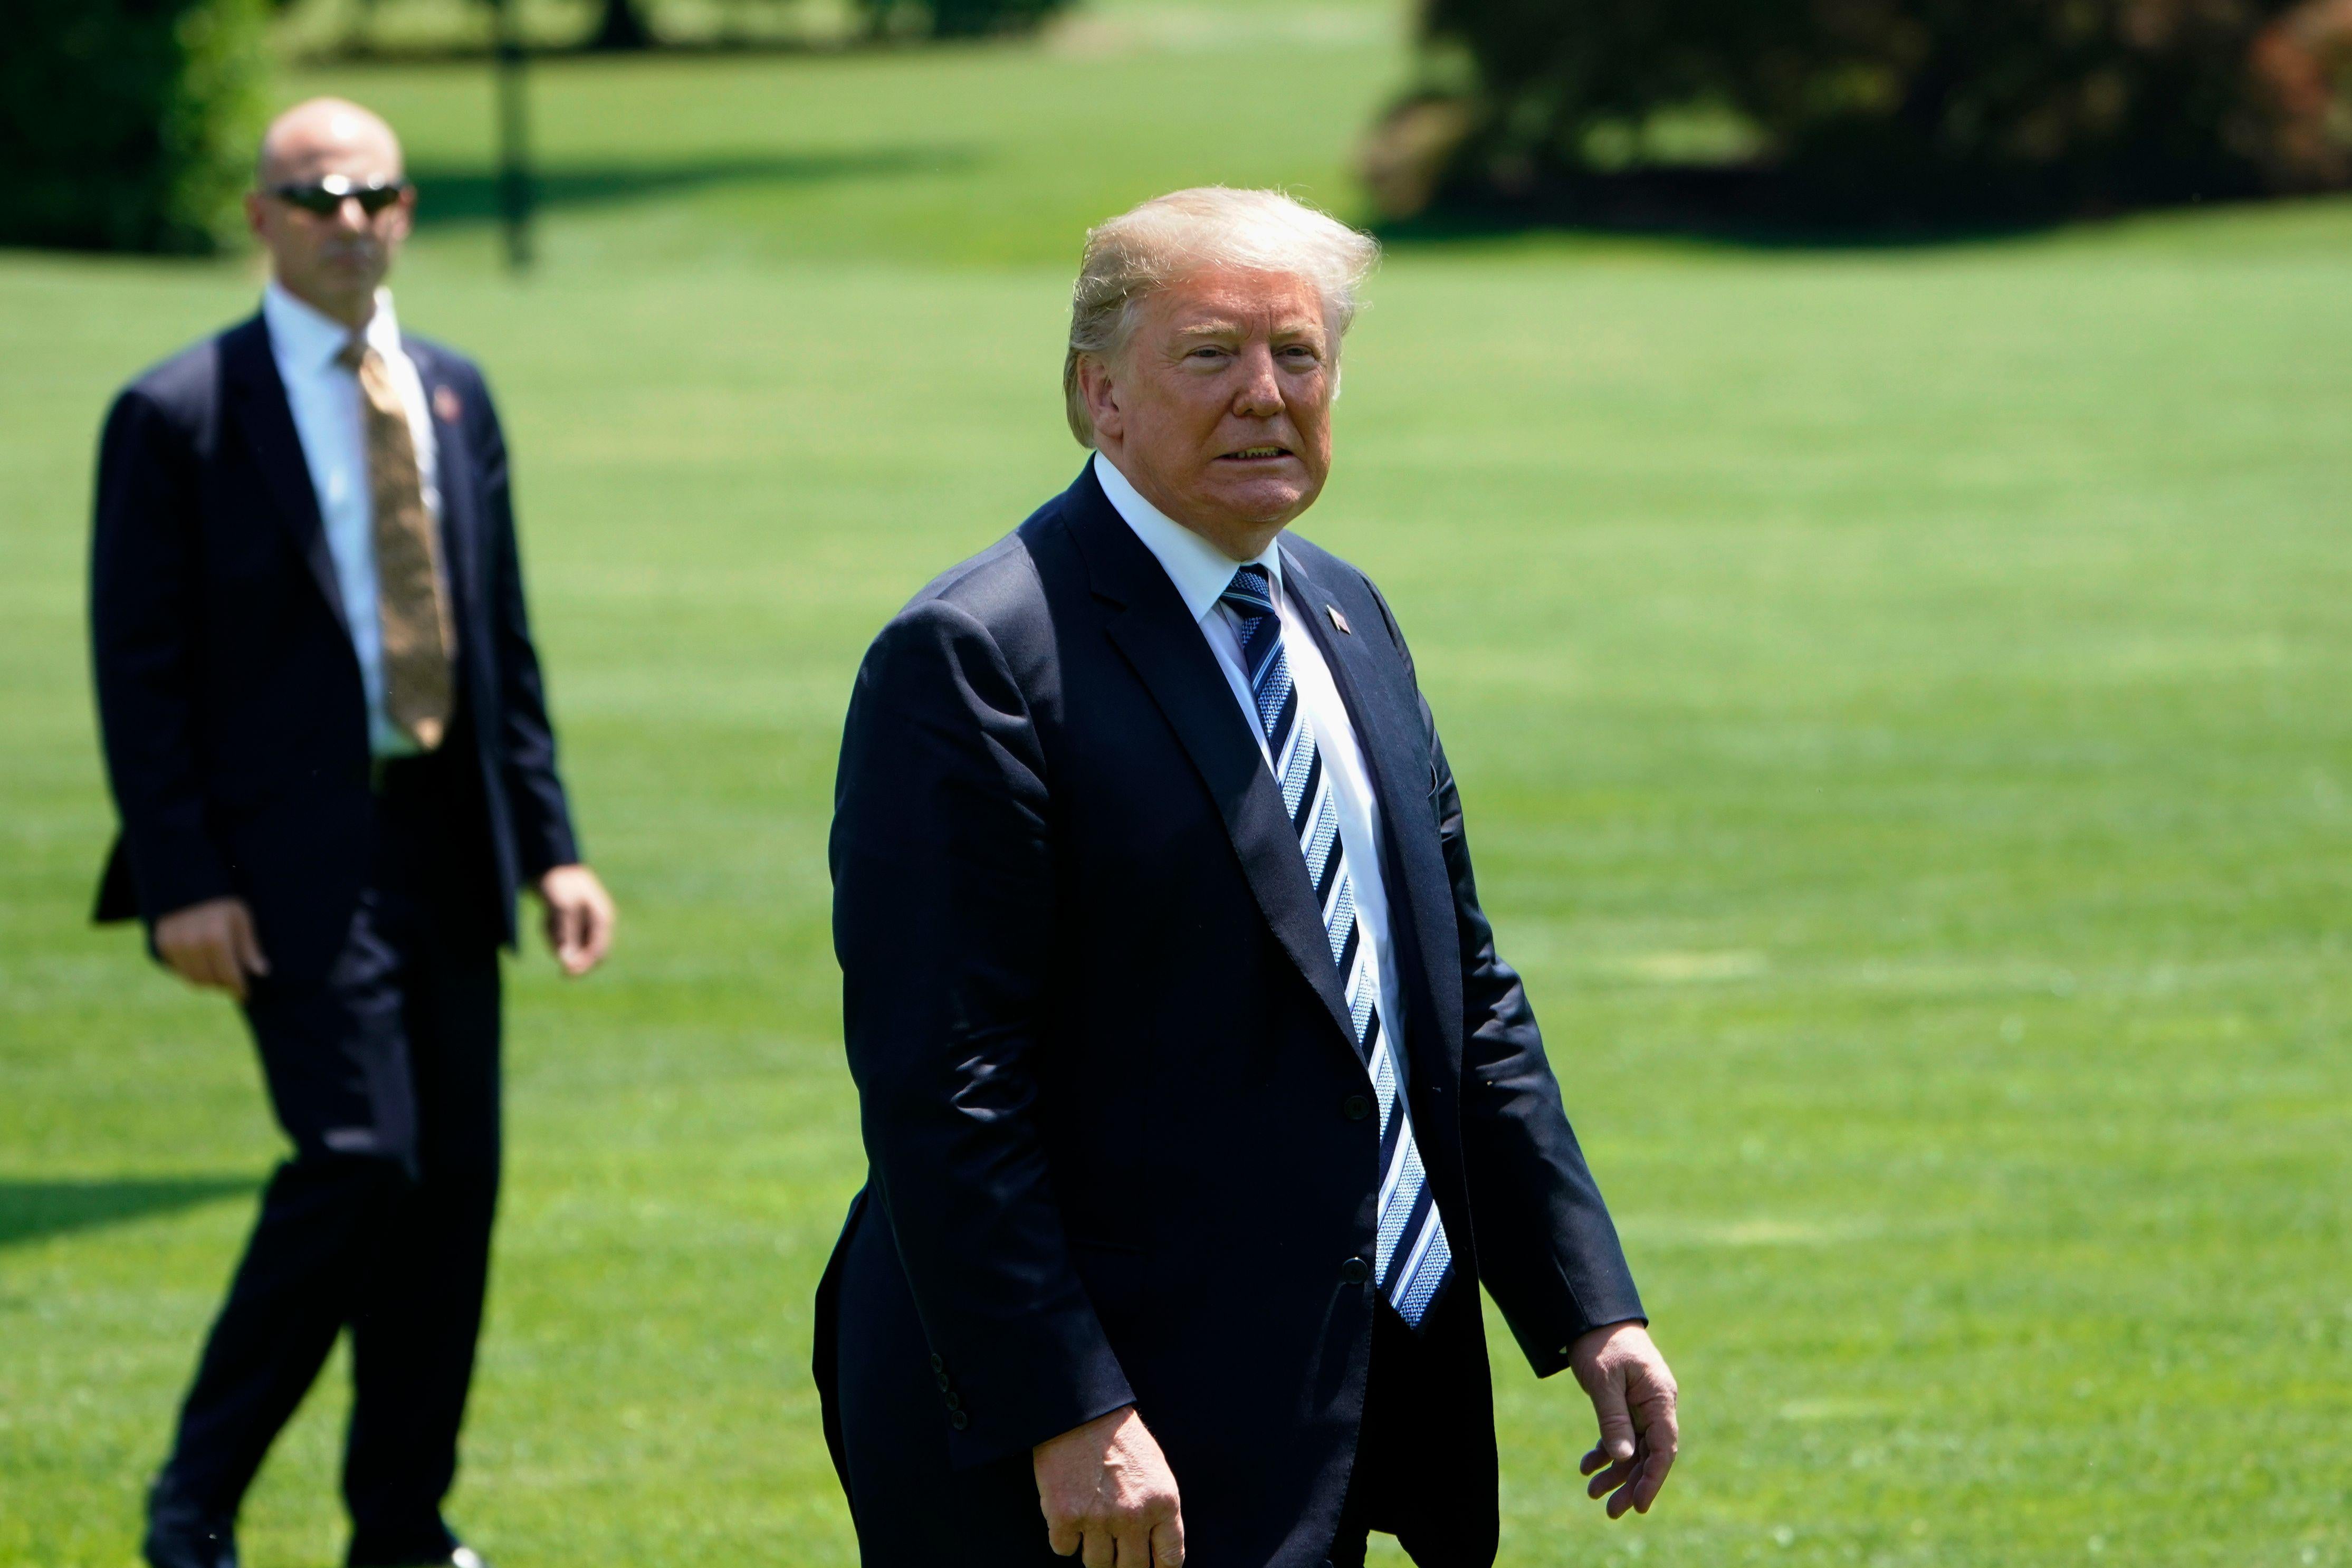 President Donald Trump walks across the South Lawn upon return to the White House on May 25, 2018 in Washington, D.C. 